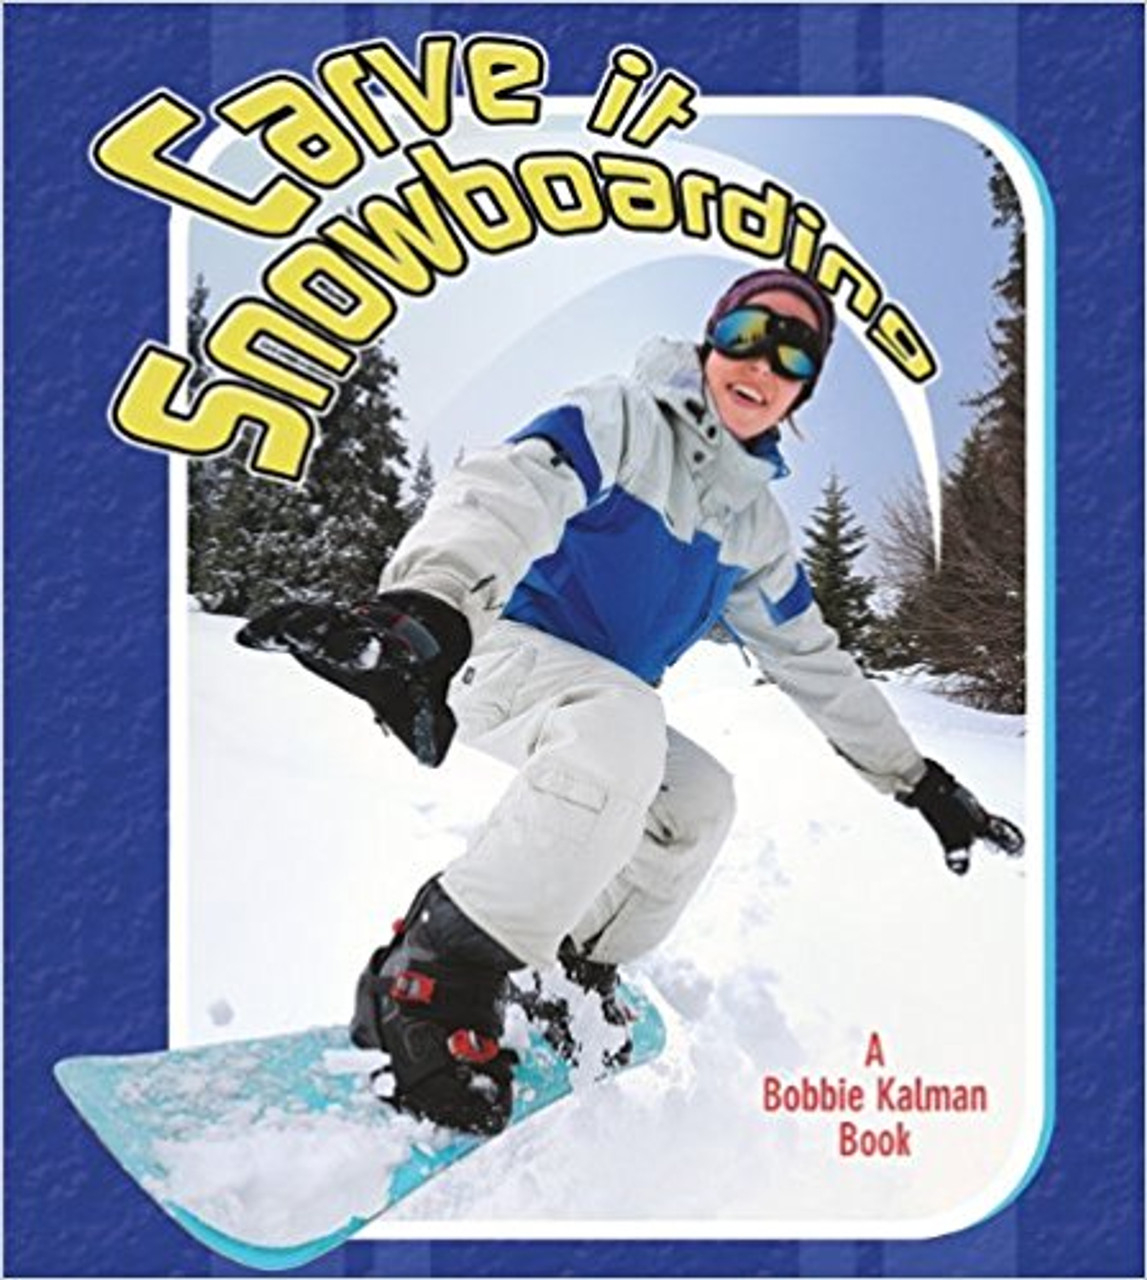 Carve It Snowboarding by Jaime Winters